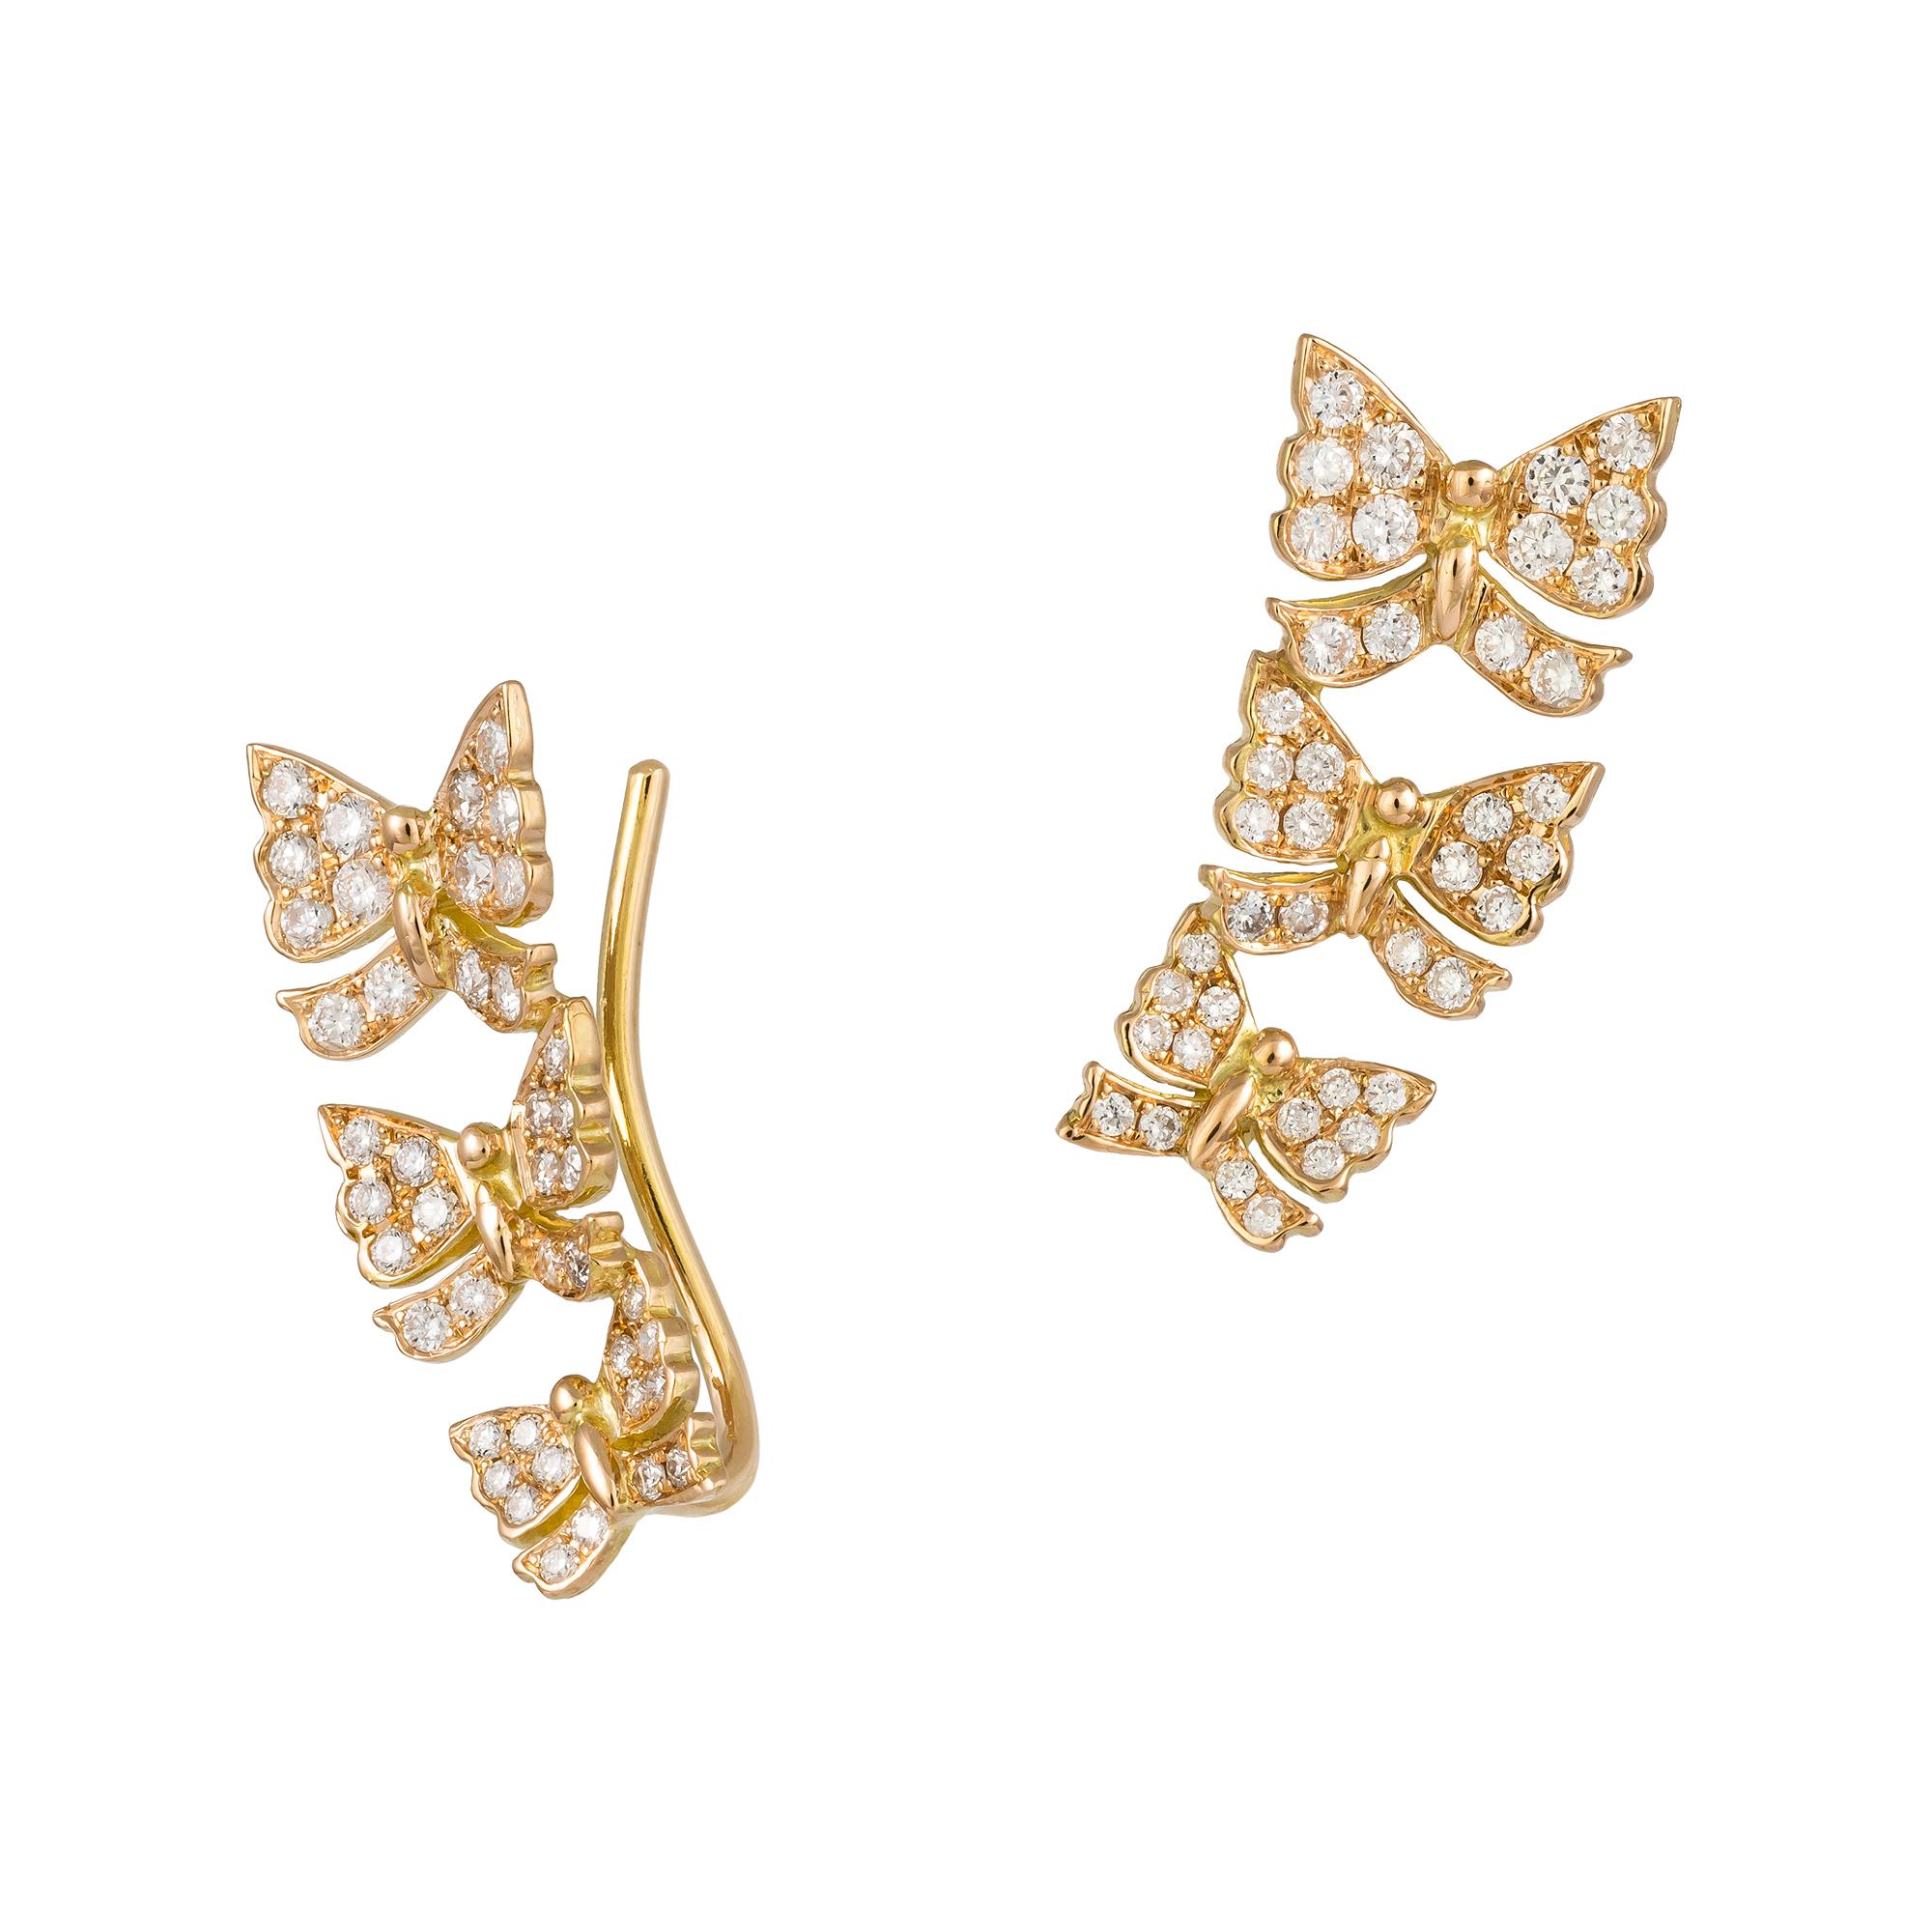 Round Cut Modern Style Diamond Earrings 18 K Yellow Gold for Her For Sale